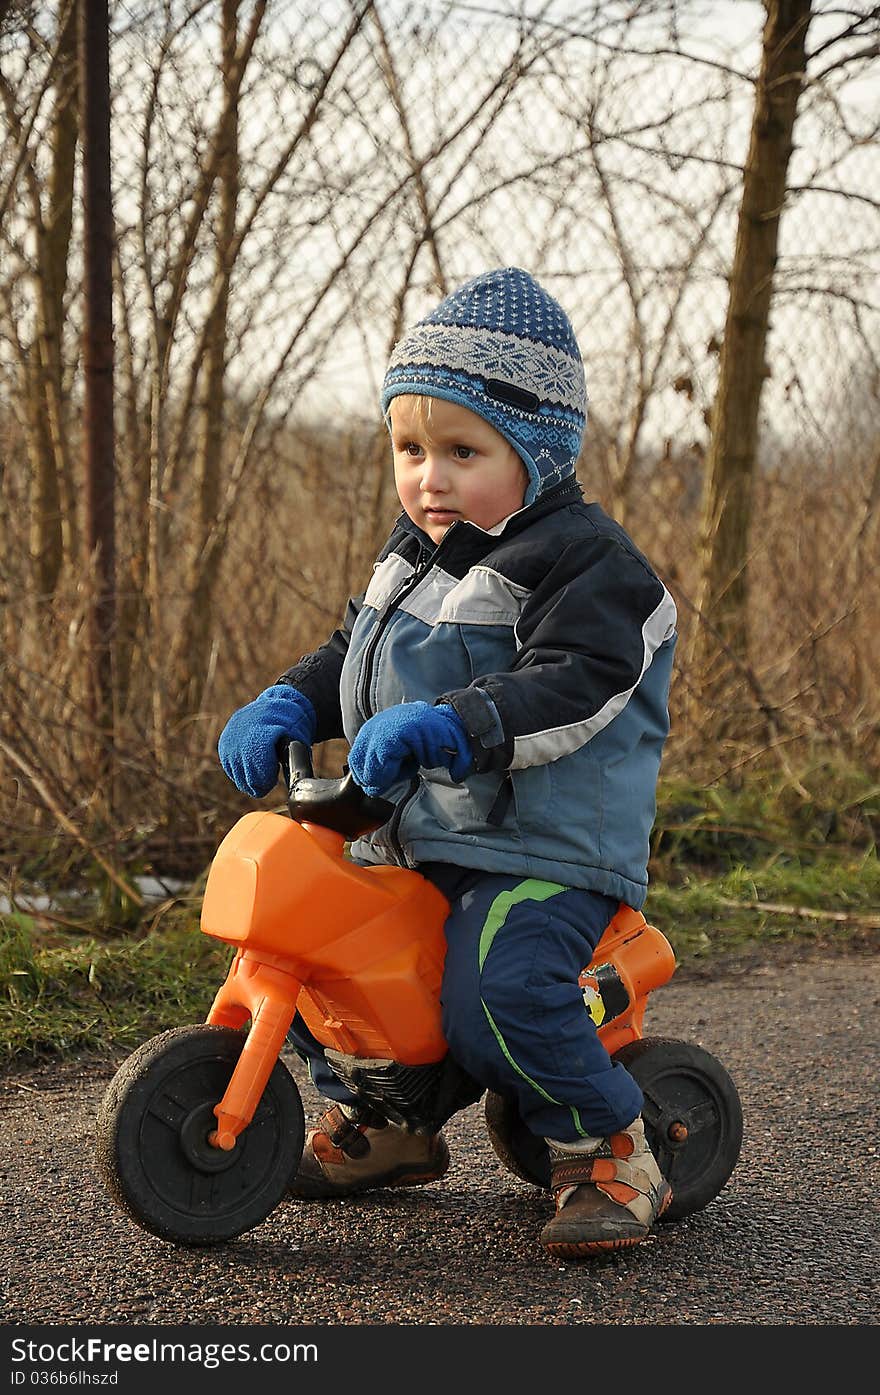 Little boy riding a toy motorbike during an afternoon walk. Little boy riding a toy motorbike during an afternoon walk